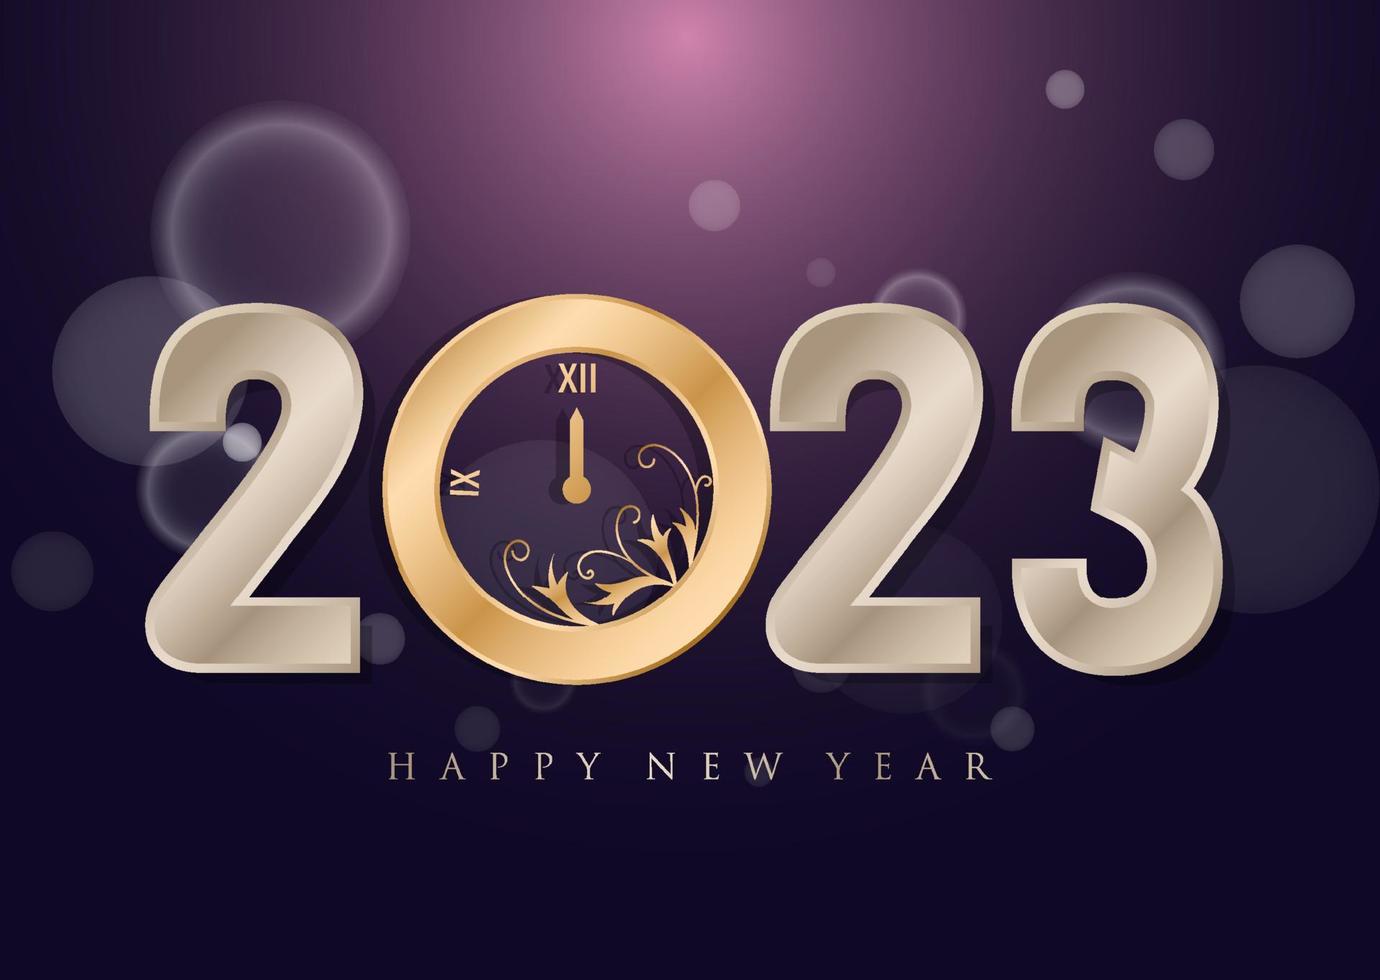 2023 Happy New Year Background Vintage Bokeh Lights Shining Clock Midnight Realistic Sparkling Burning Sparkler Golden Clock In Bokeh Lights Holiday Illustration Free Vector